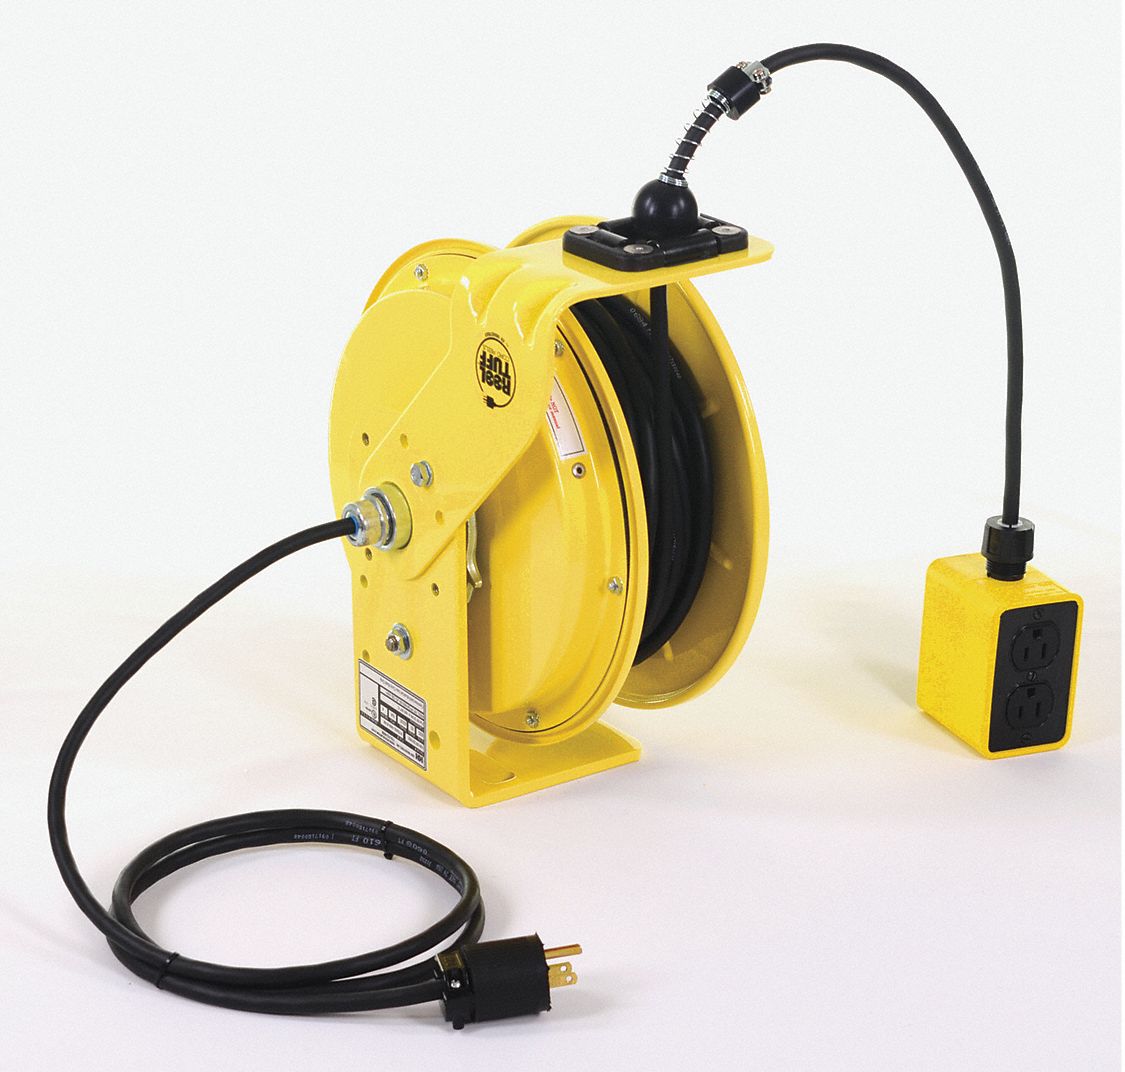 KH INDUSTRIES RETRACTABLE CORD REEL, STEEL, 16 AWG, 4 OUTLETS, 10A, 125V  AC, 3 CONDUCTORS, 25 FT - Self-Retracting Cord Reels - KHIRTBA3LWD515J16F